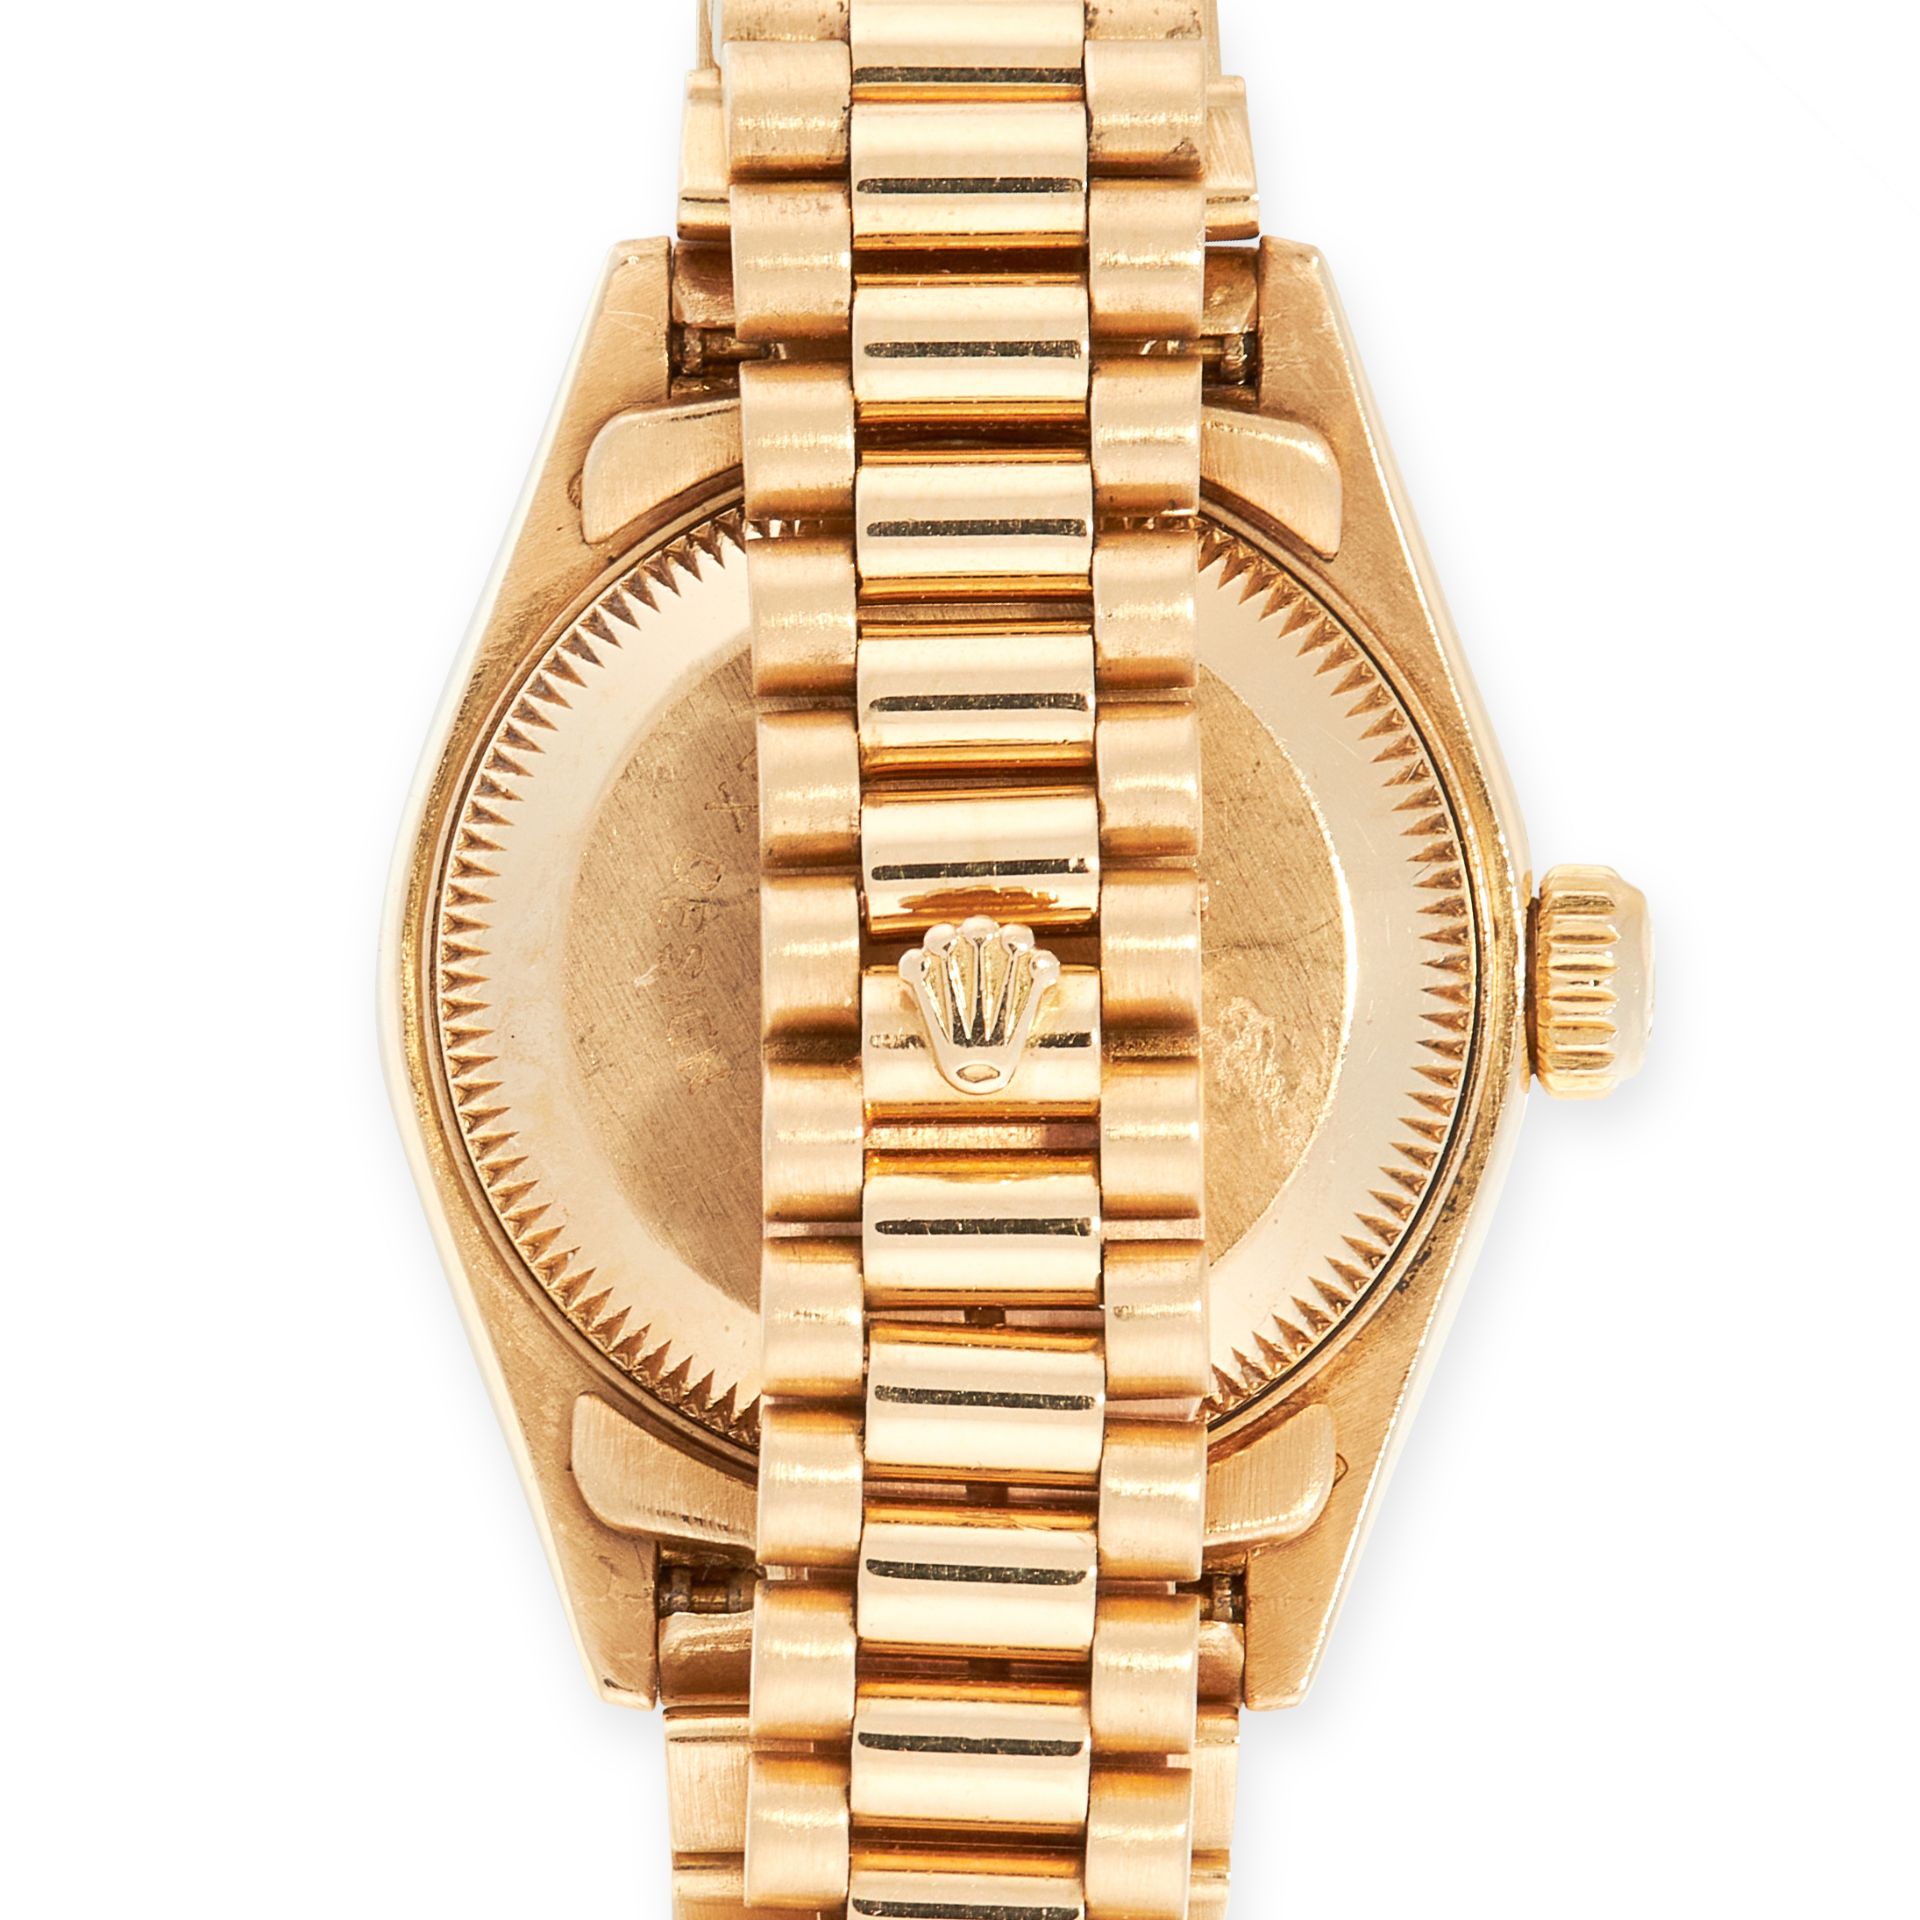 A LADIES OYSTER PERPETUAL DATEJUST DIAMOND WRIST WATCH, ROLEX in 18ct yellow gold, the circular face - Image 2 of 3